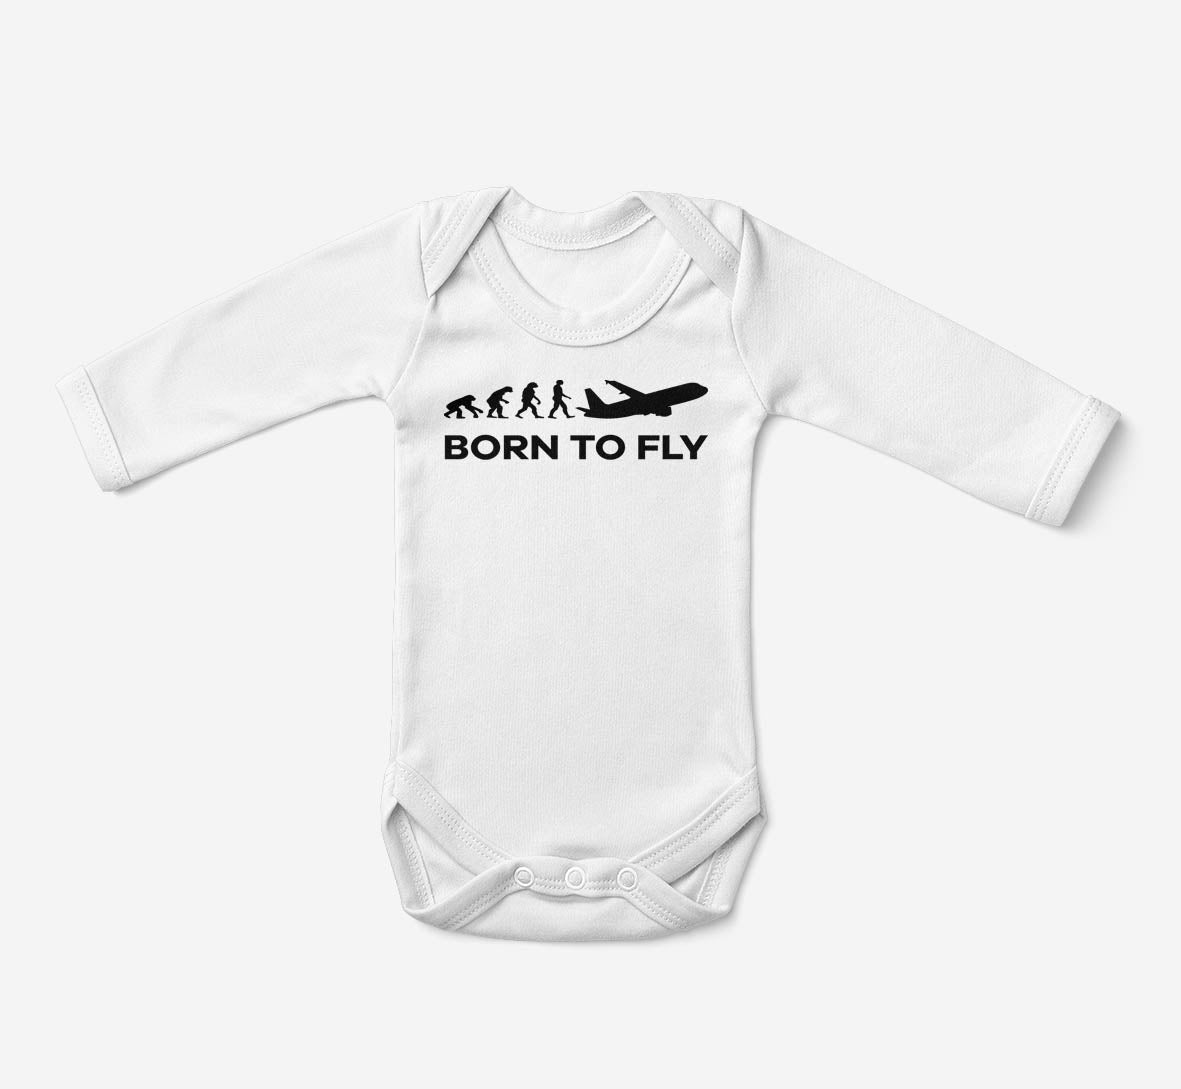 Born To Fly Designed Baby Bodysuits